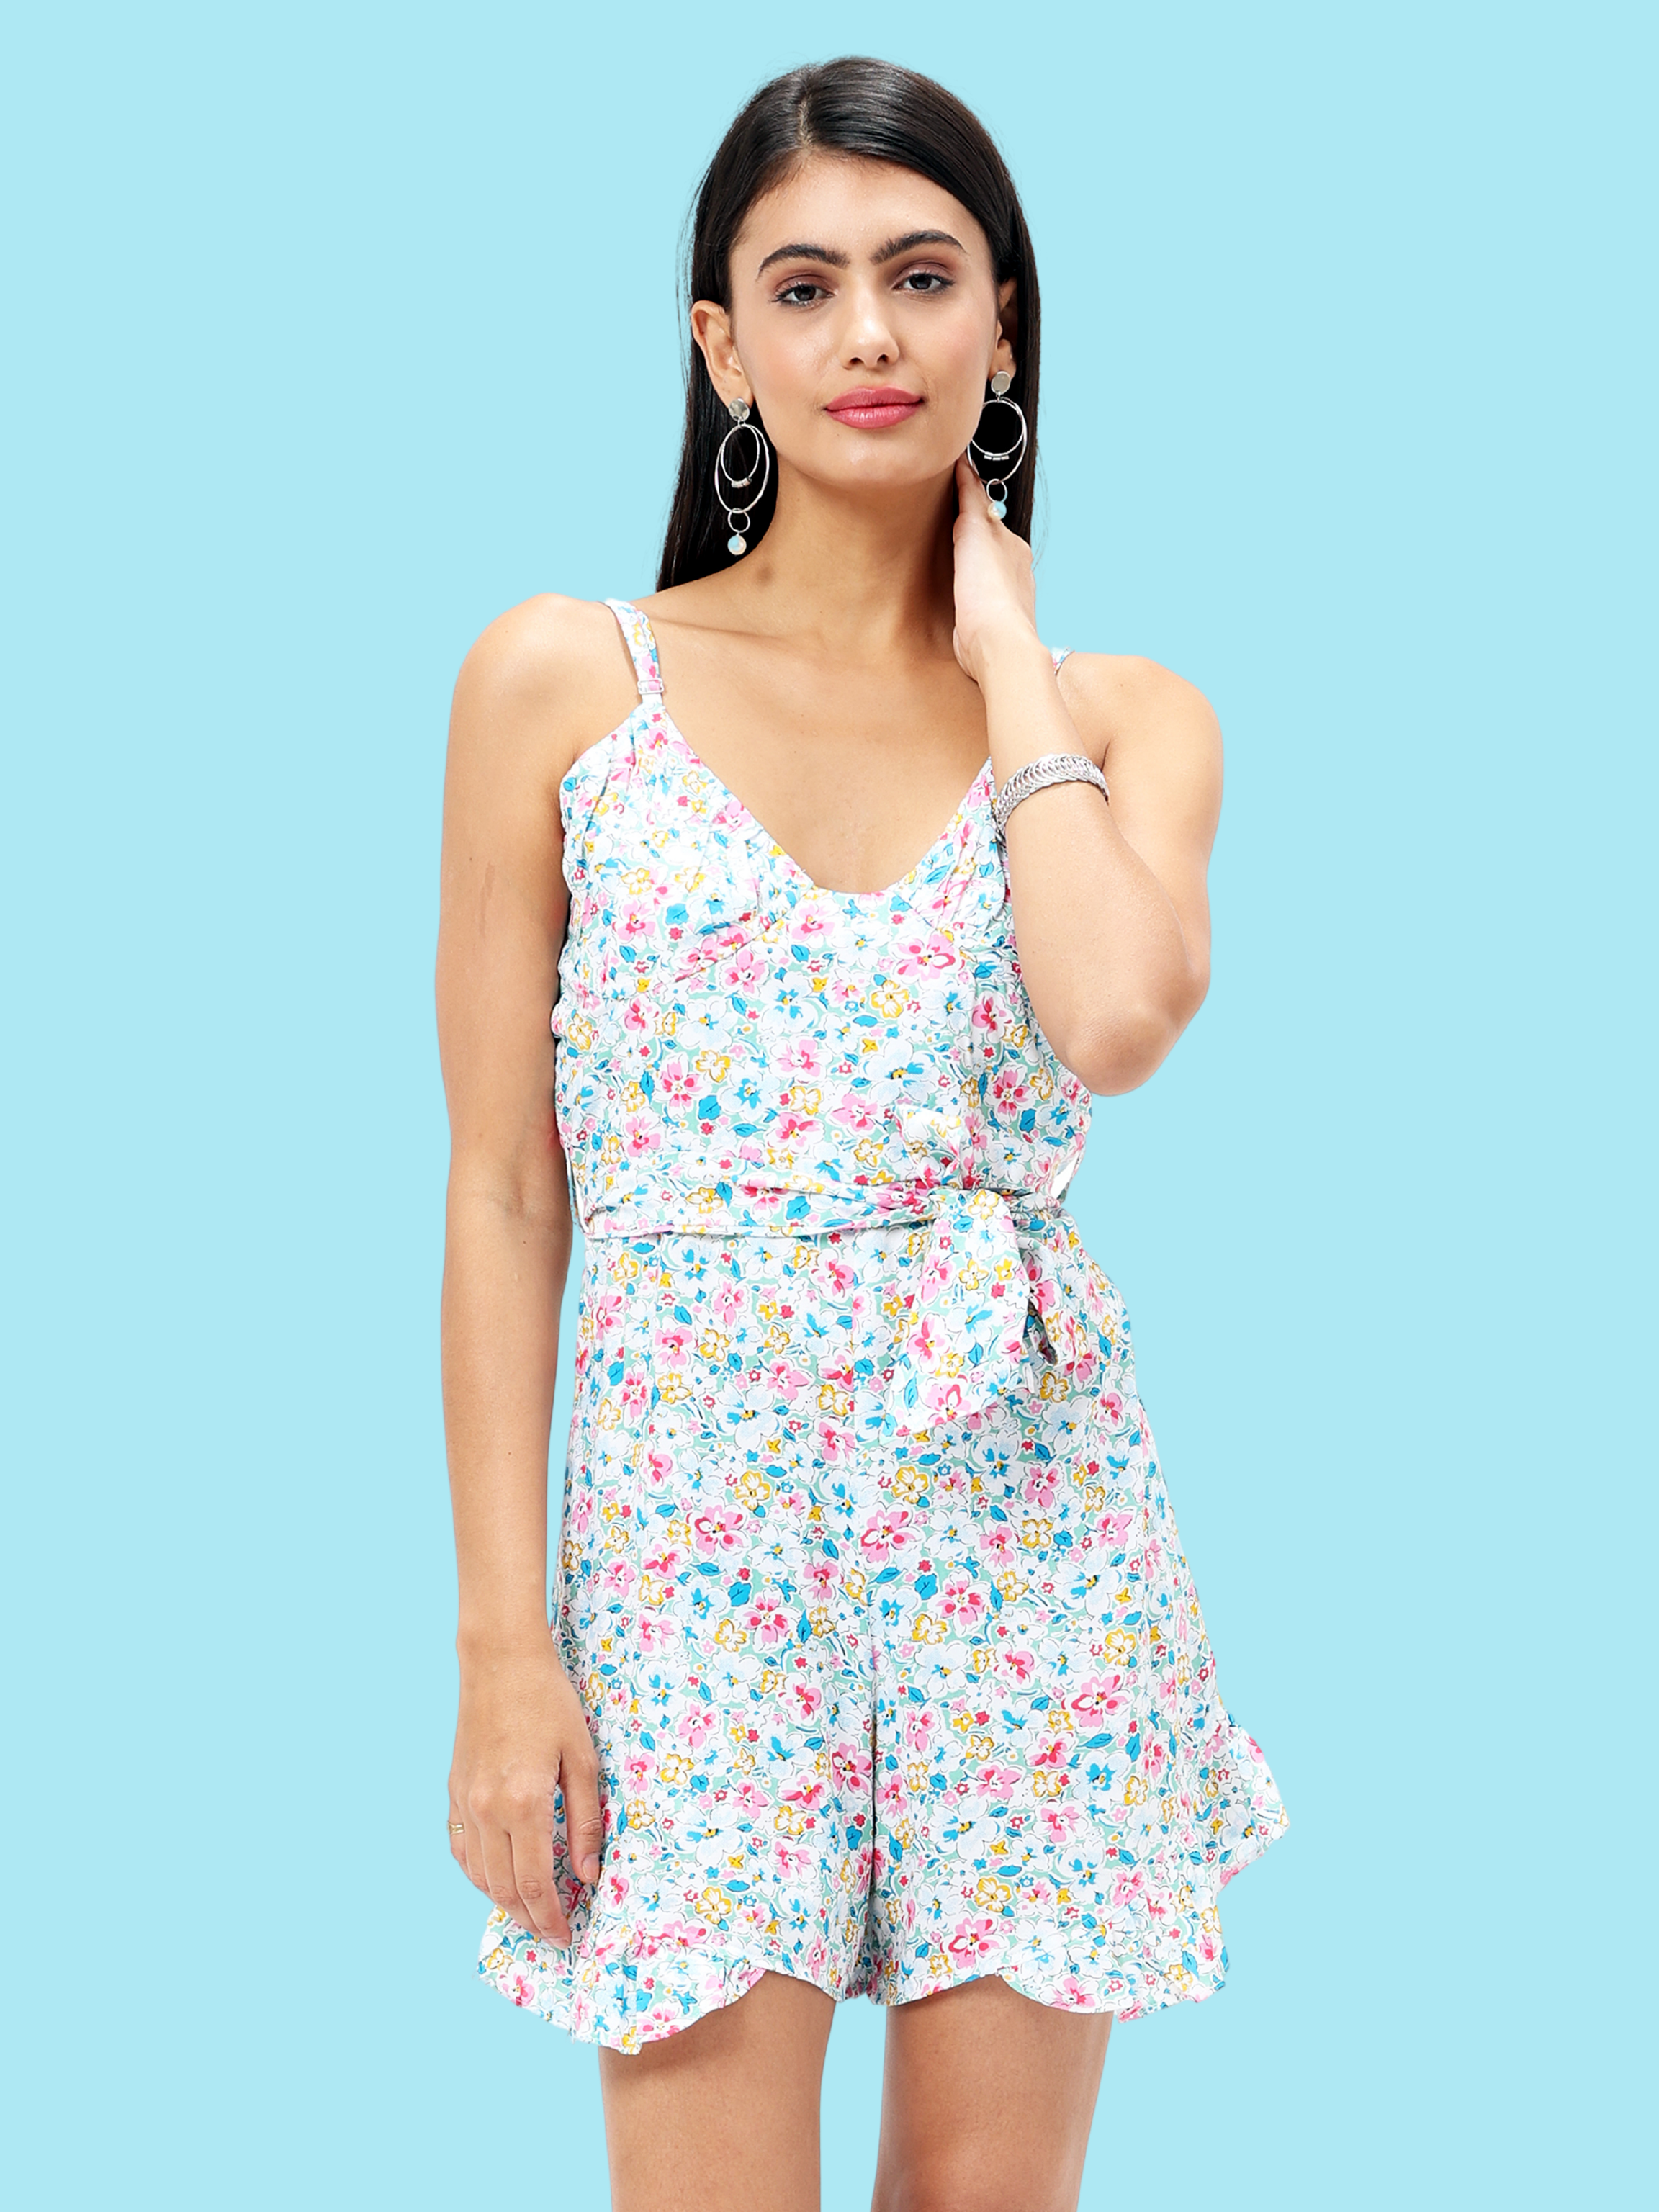 The Trendy Treasure - Radhella Women's Floral Printed Frill Detail Playsuit